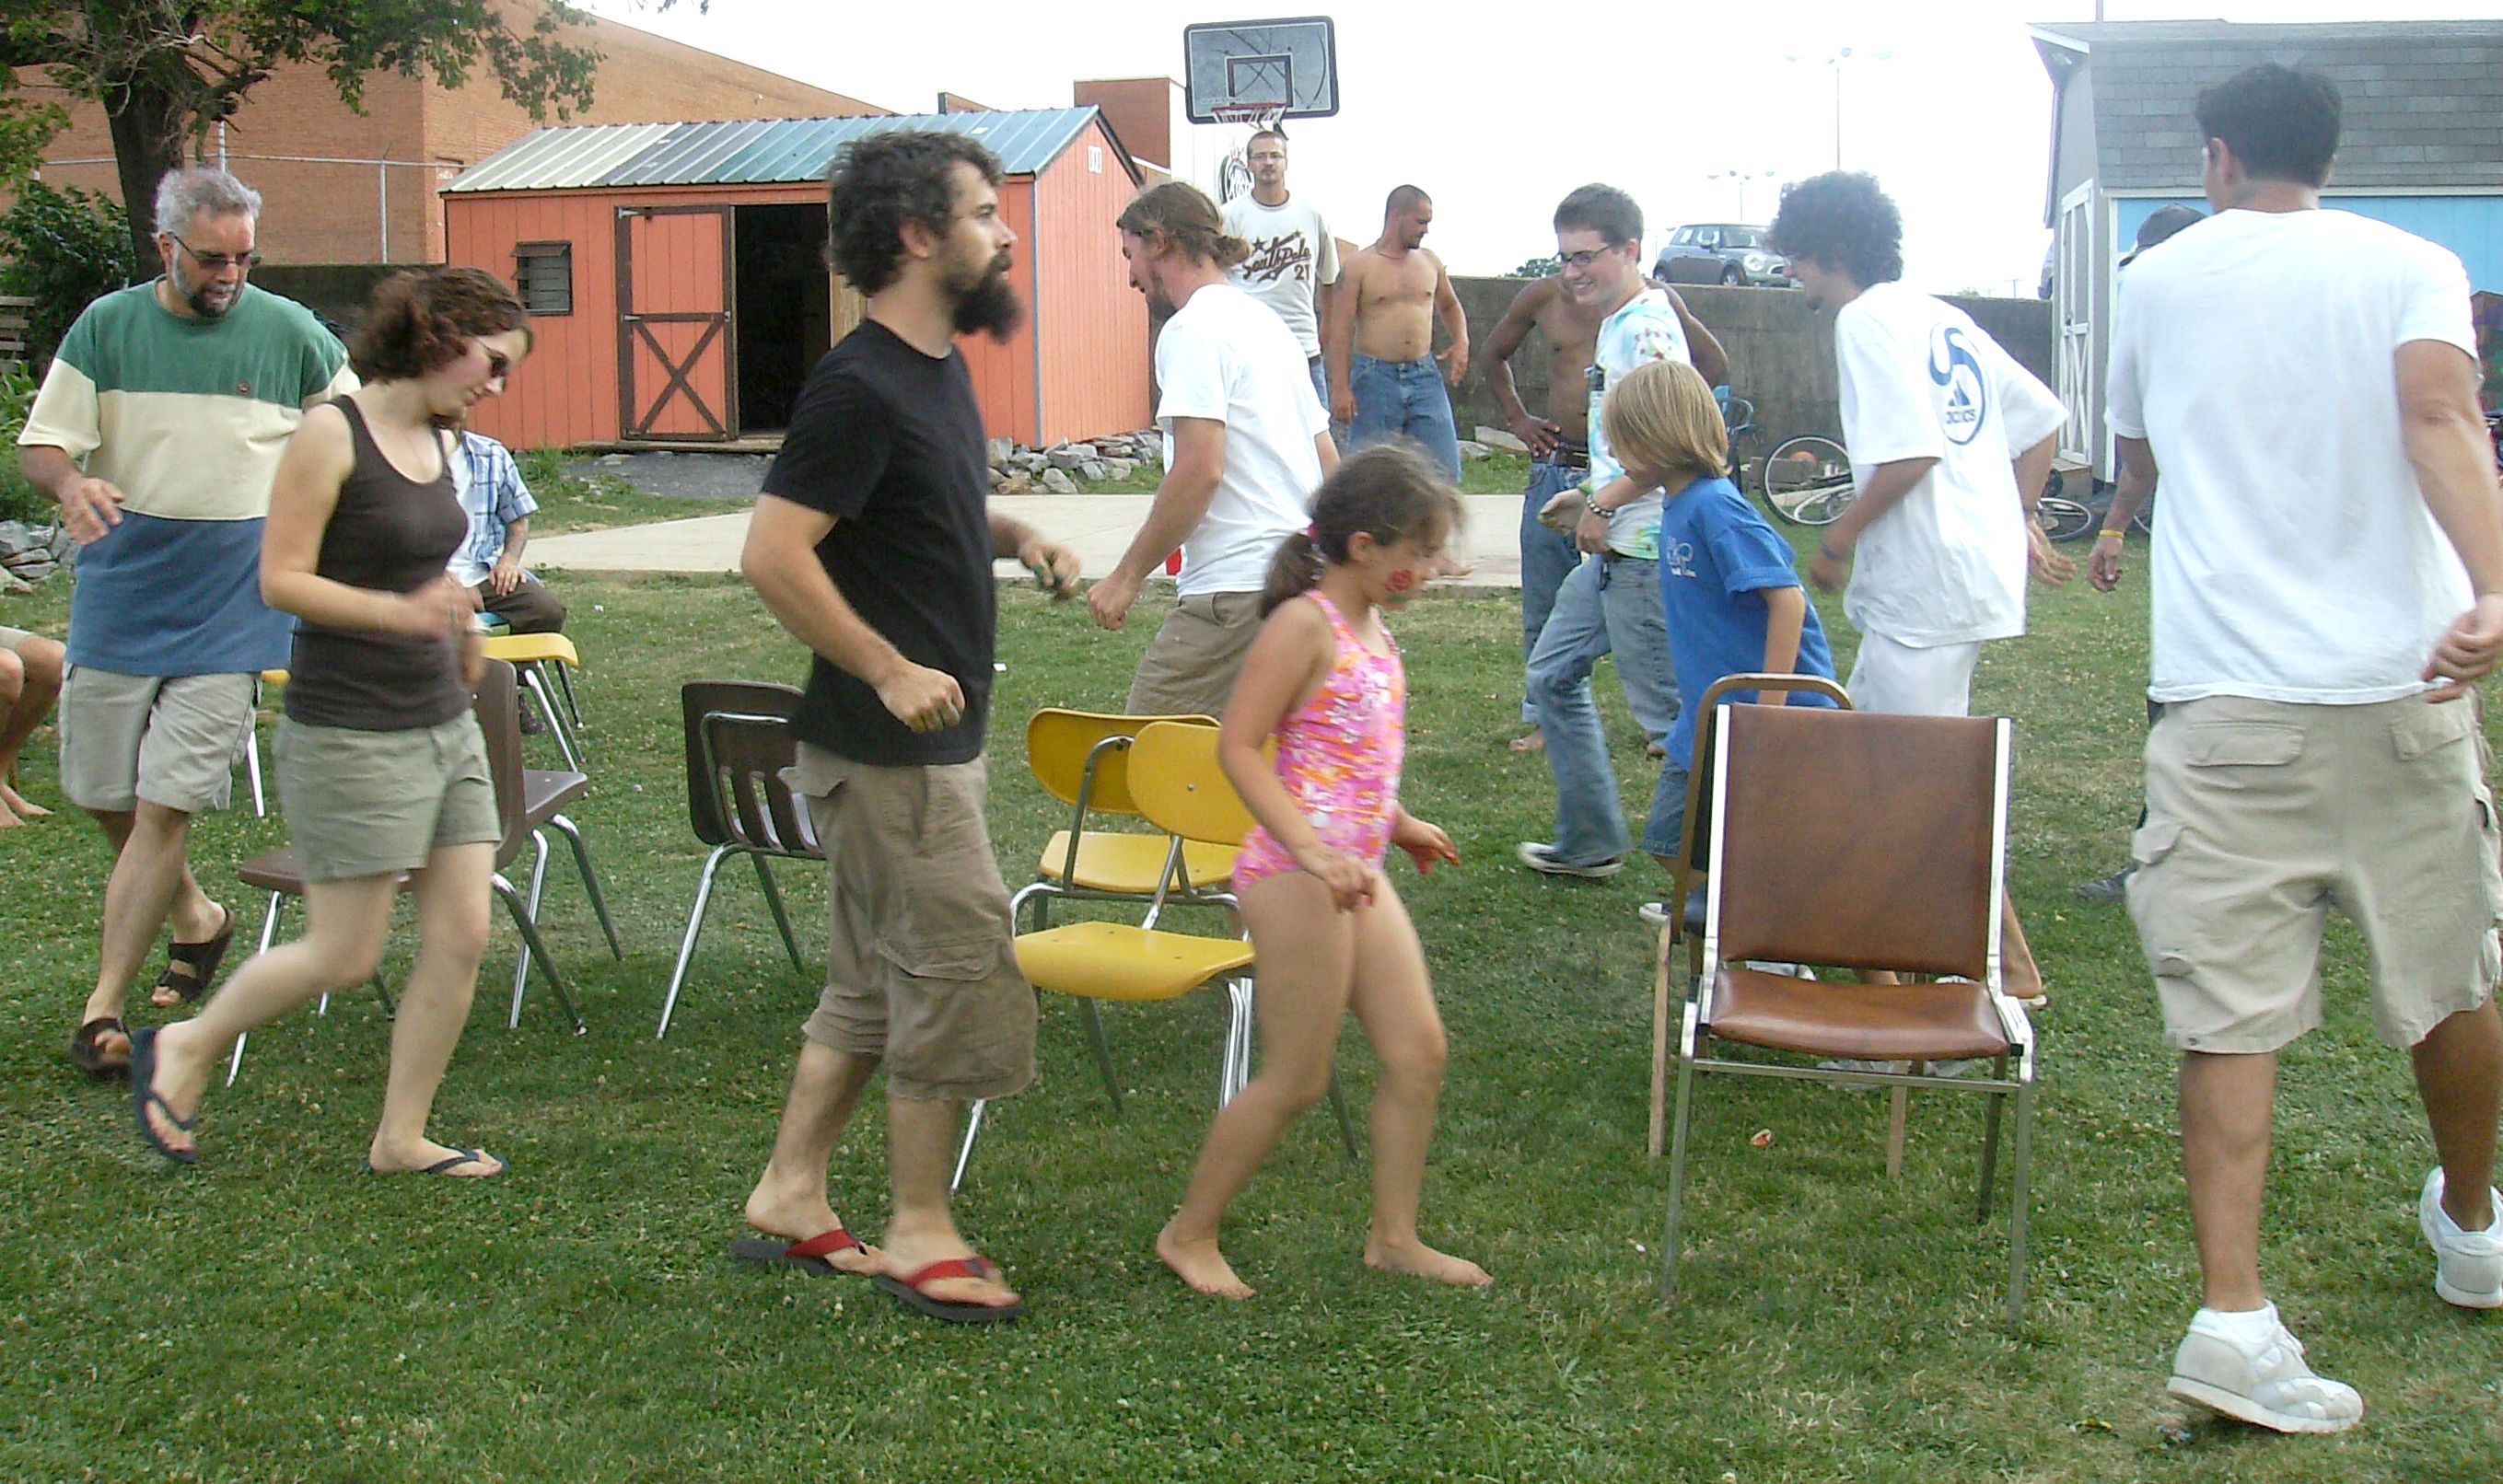 A game of musical chairs being played at a party.